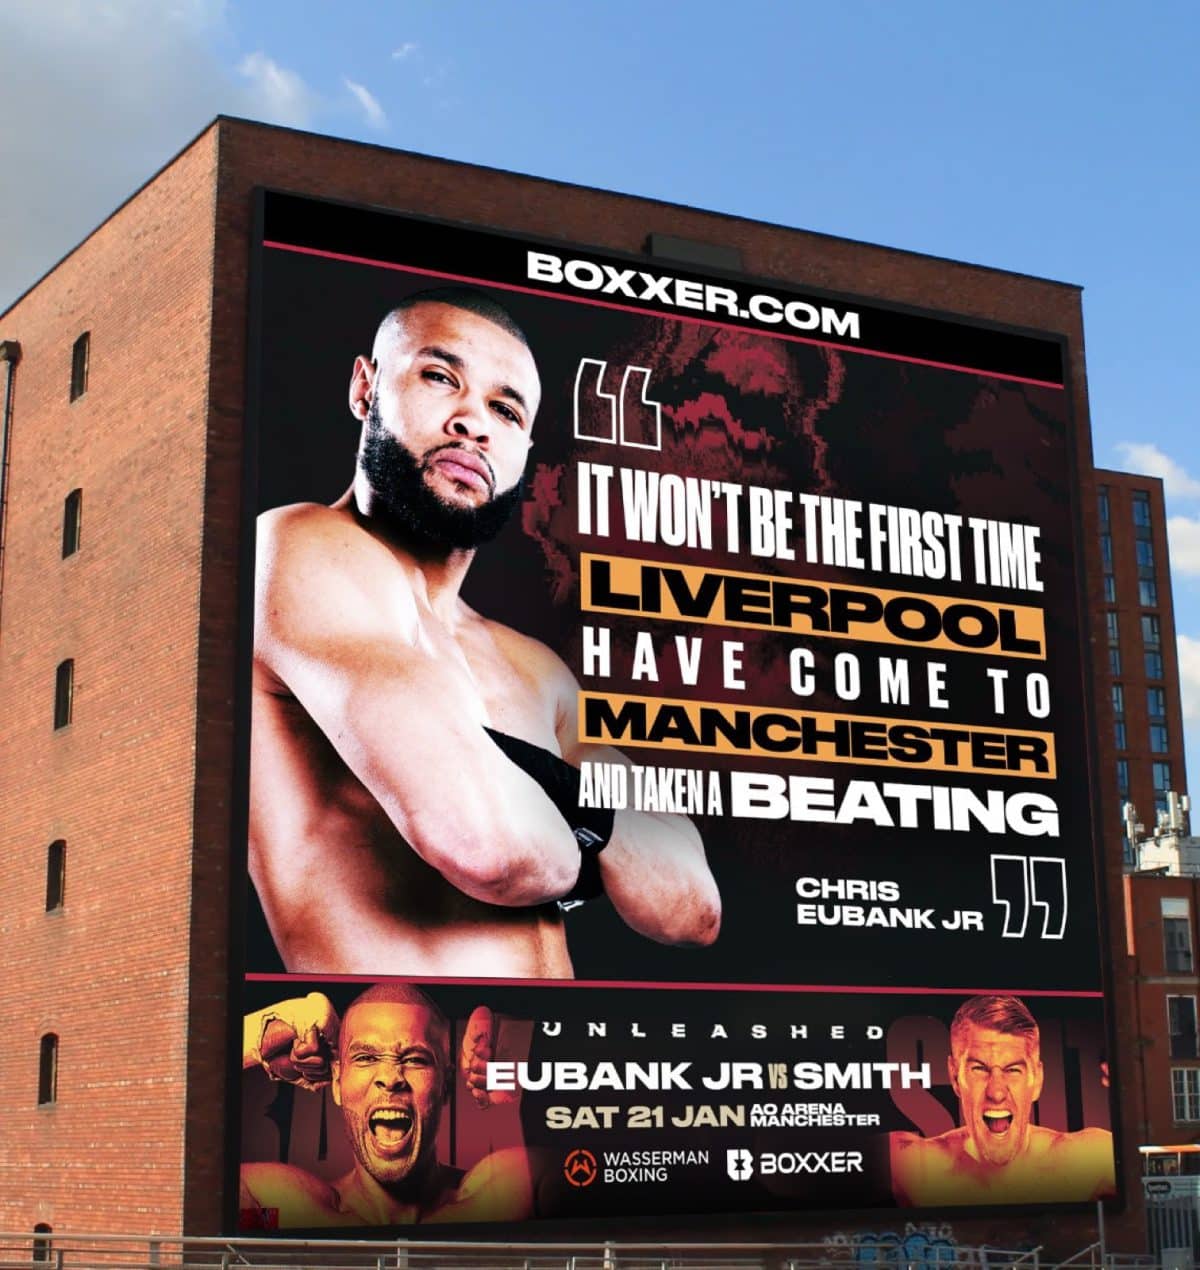 Image: Chris Eubank Jr goads Liam Smith with billboard message in Manchester